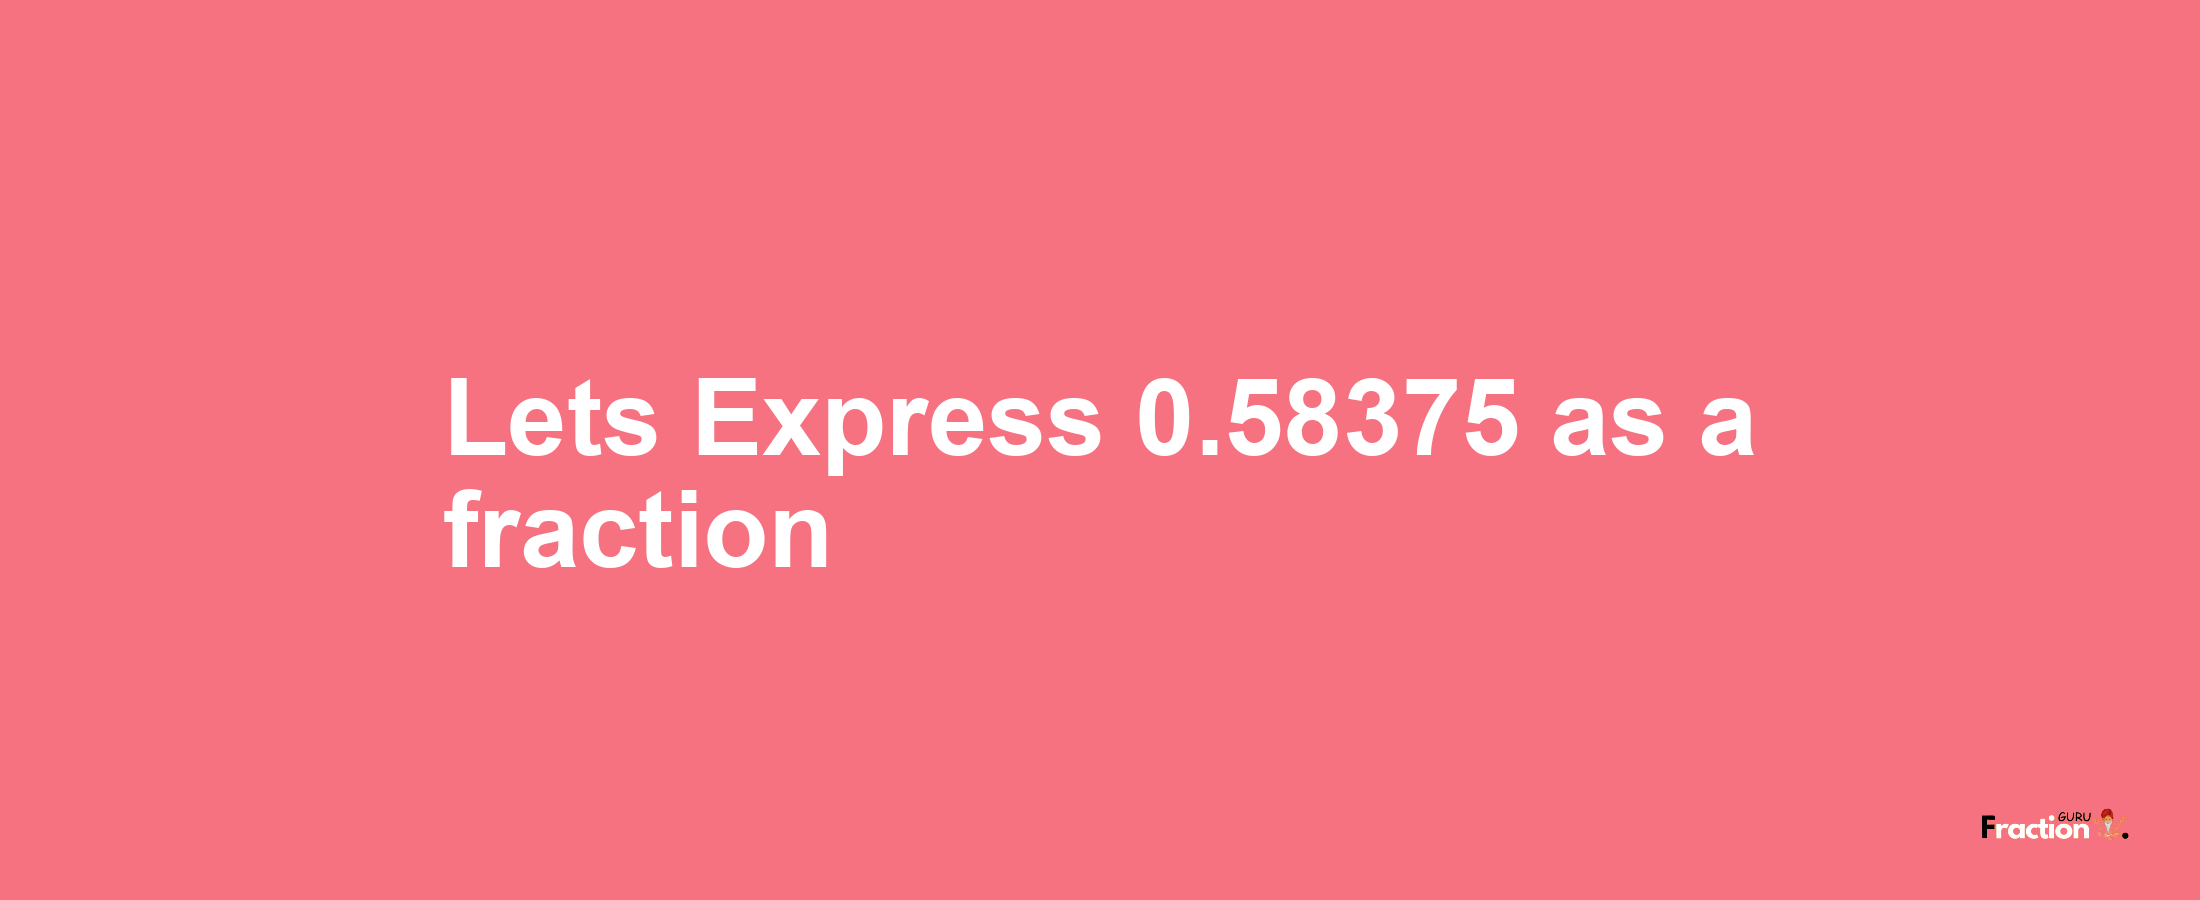 Lets Express 0.58375 as afraction